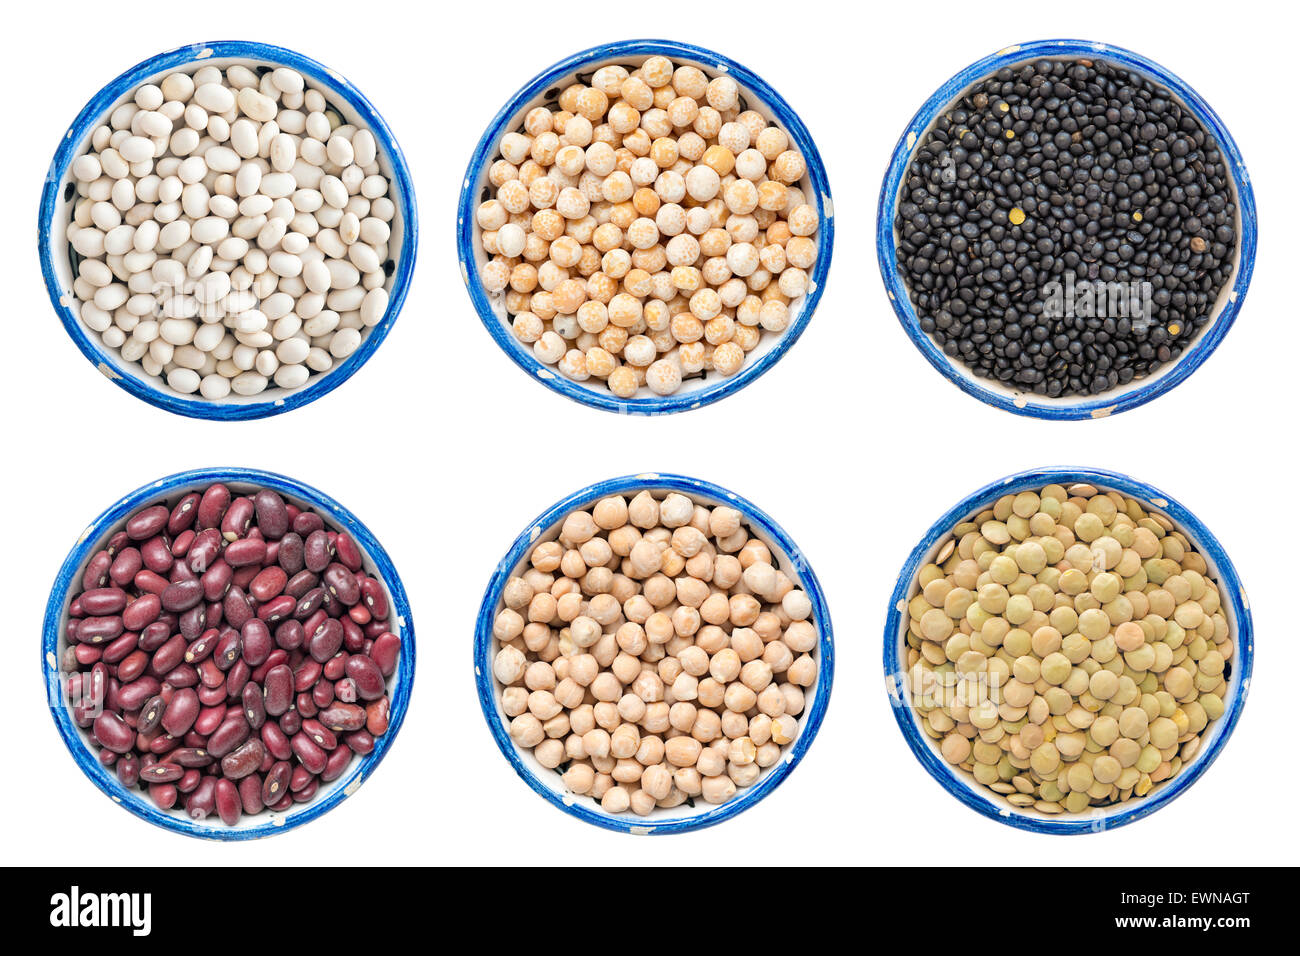 different kind of dry legume beans - white and red kidney, pea and chickpea, black and green lentils isolated on white Stock Photo